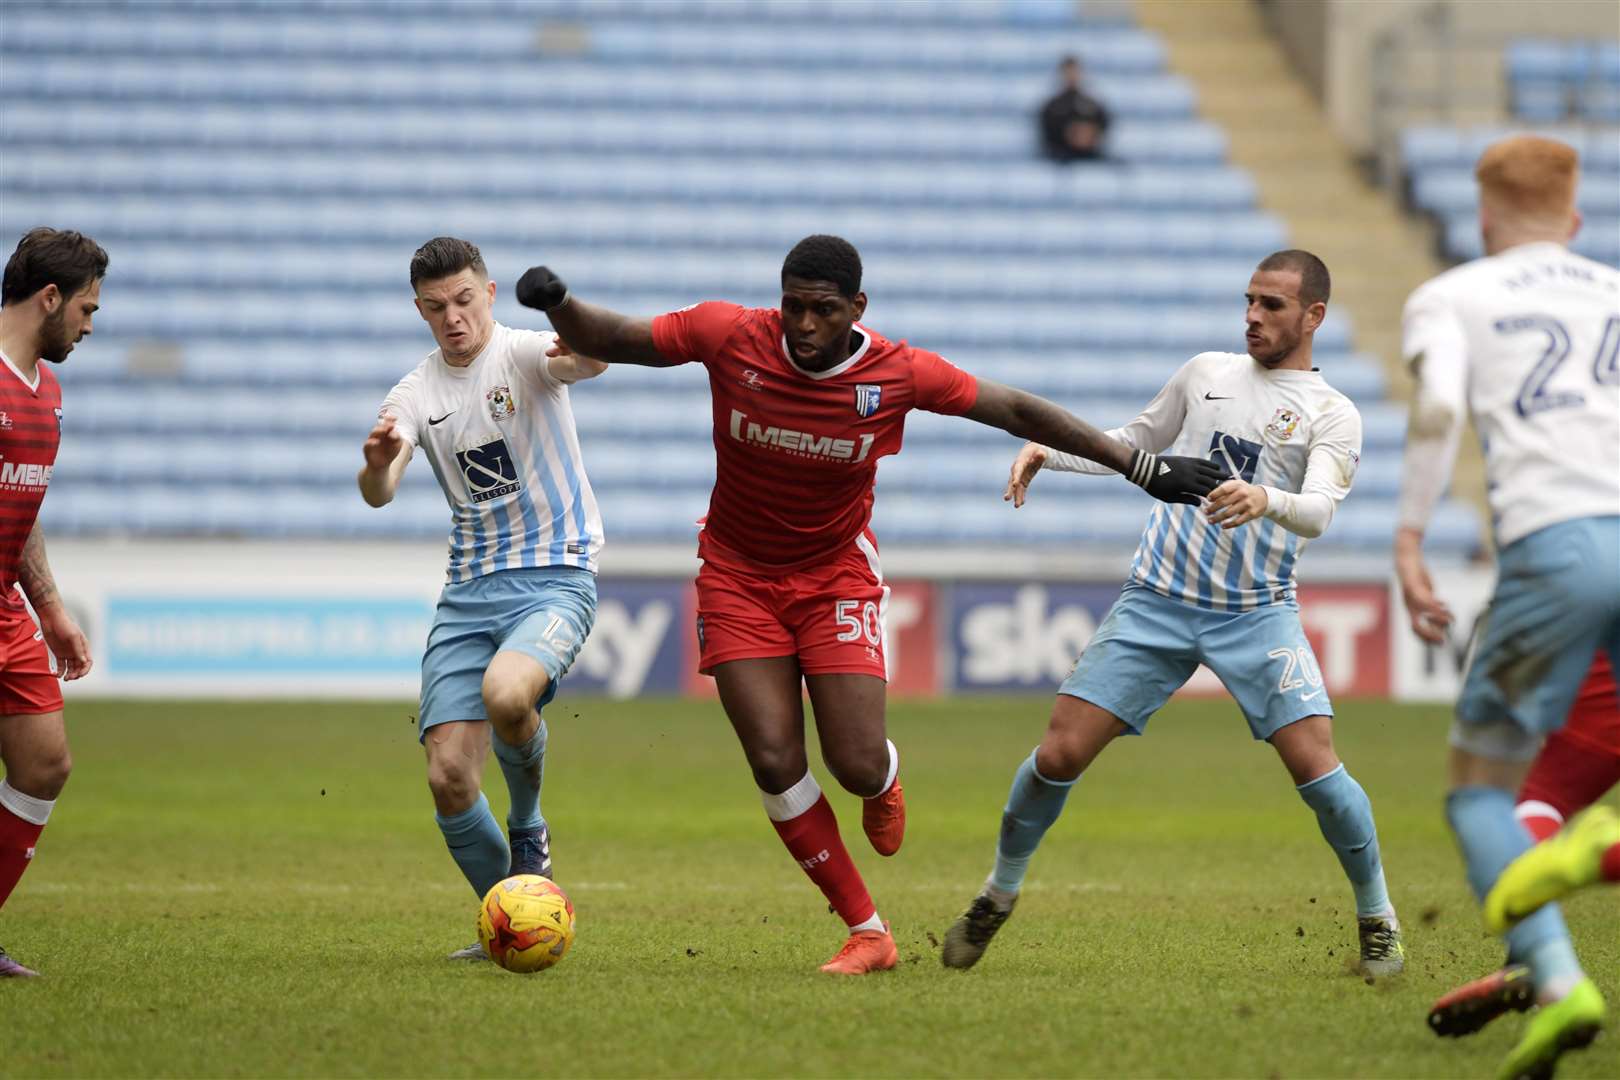 Callum Reilly up against the Gills at the Ricoh Arena in February 2017 Picture: Barry Goodwin